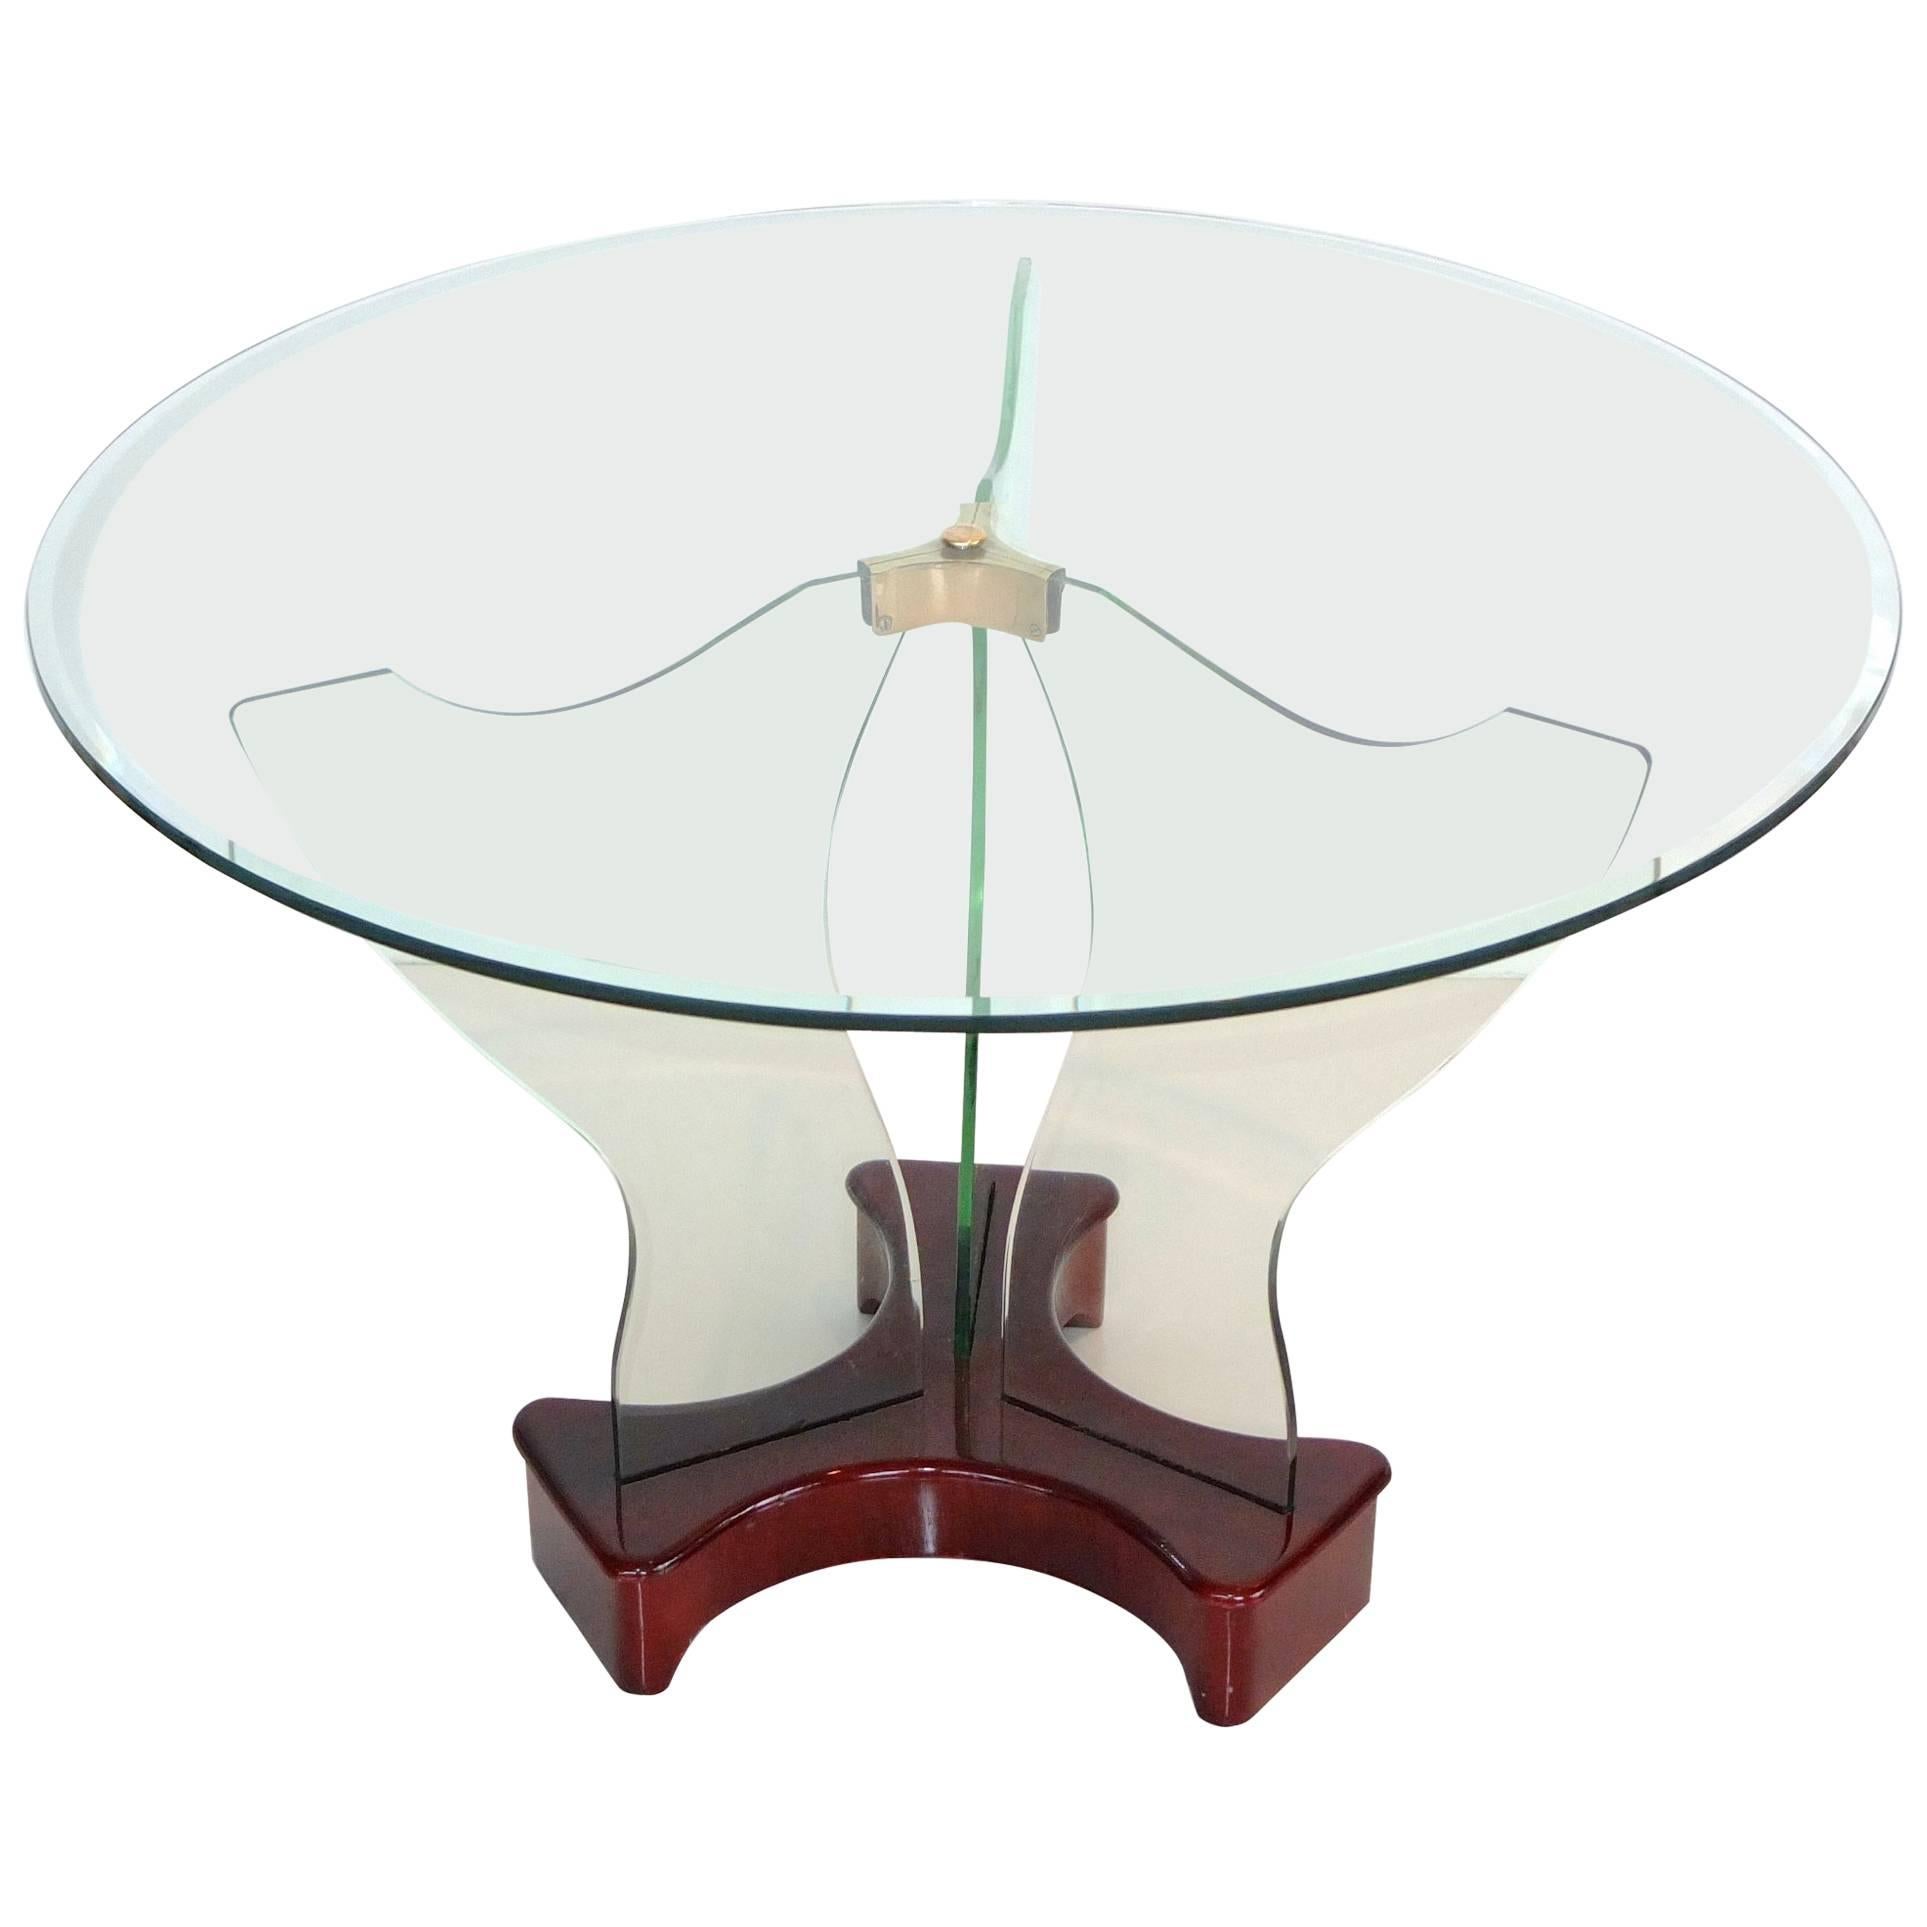 Luigi Brusotti 1930s Glass, Brass and Mahogany Cocktail Table For Sale